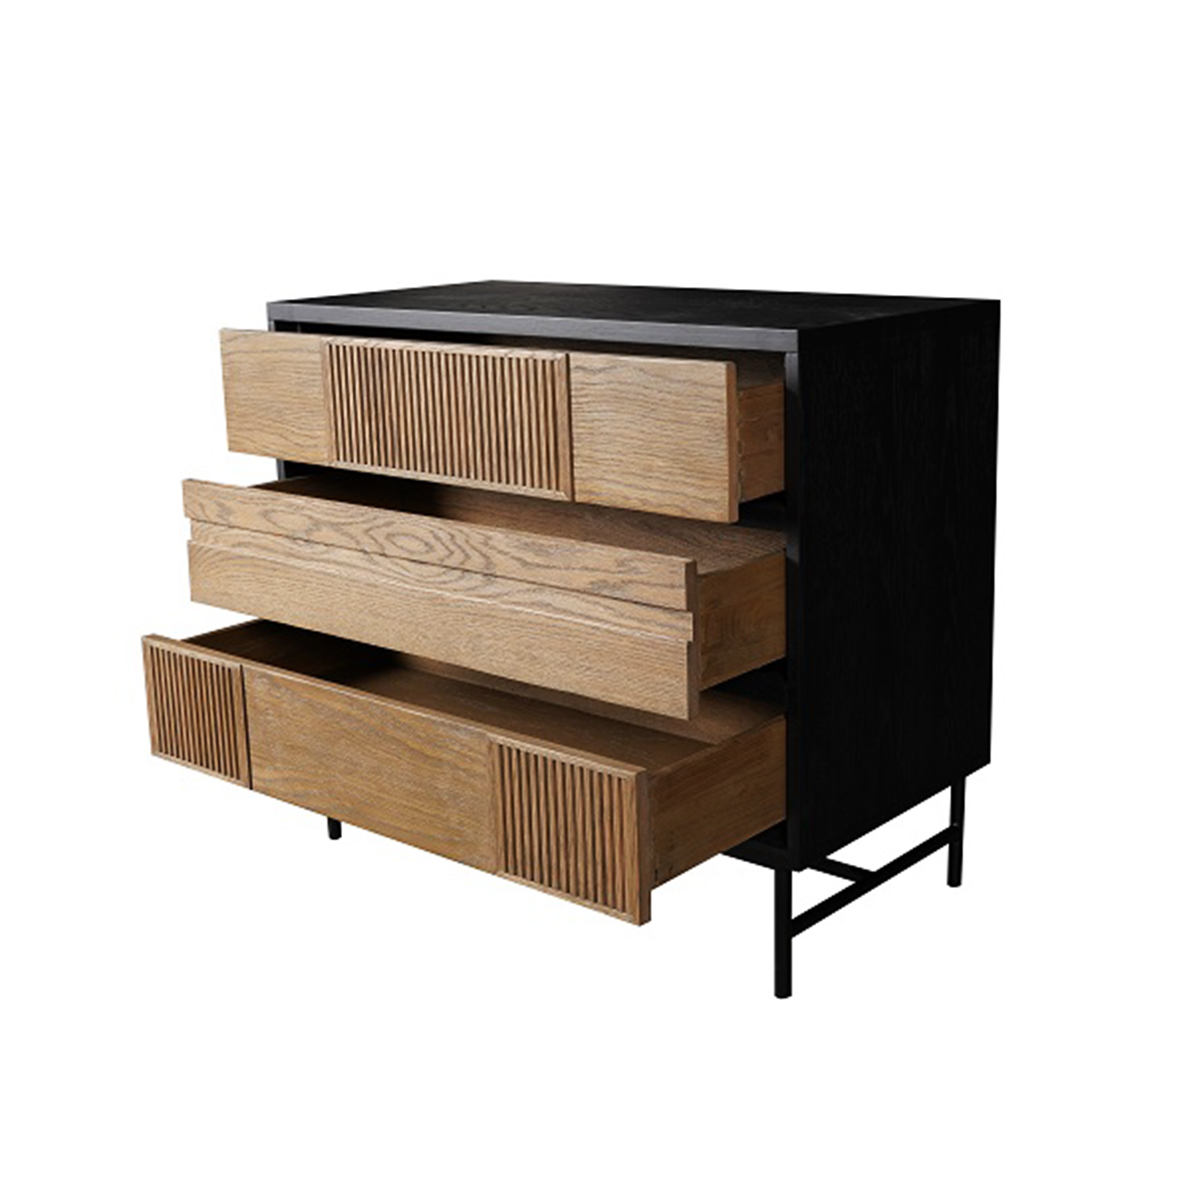 SANTIAGO CHEST OF DRAWERS 1